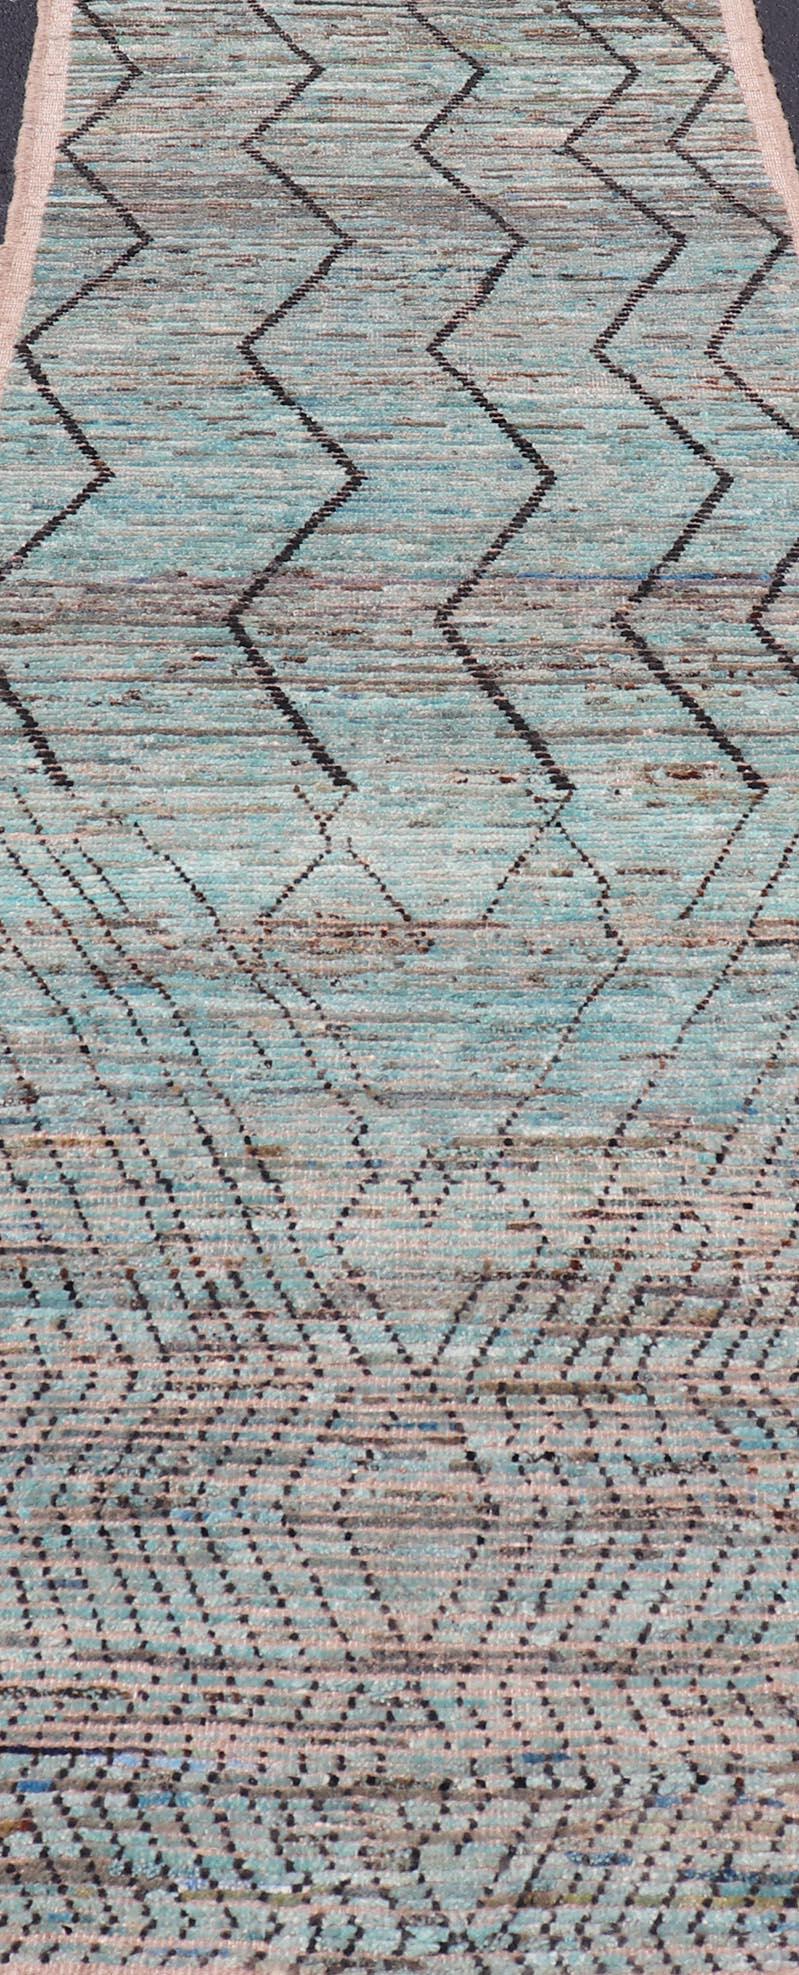 Modern Casual Runner in Wool with Sub-Geometric Modern Design in Teal & Charcoal. Keivan Woven Arts; rug SNK-2408, country of origin / type: Afghanistan / Modern Casual, circa Early-21th Century.
Measures: 3'4 x 9'10 
This modern casual tribal